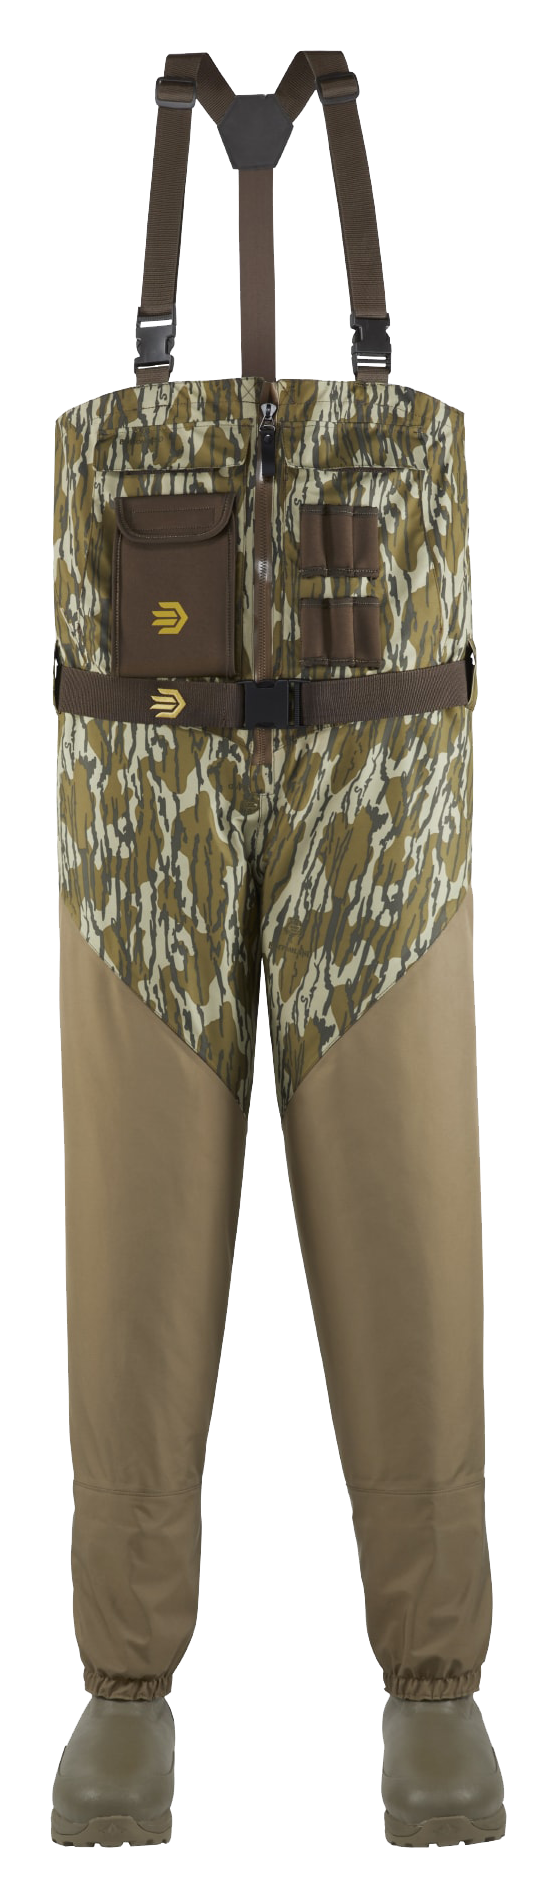 LaCrosse Alpha Agility Select Insulated Front-Zip Breathable Hunting Waders for Men - Mossy Oak Original Bottomland - 11/King